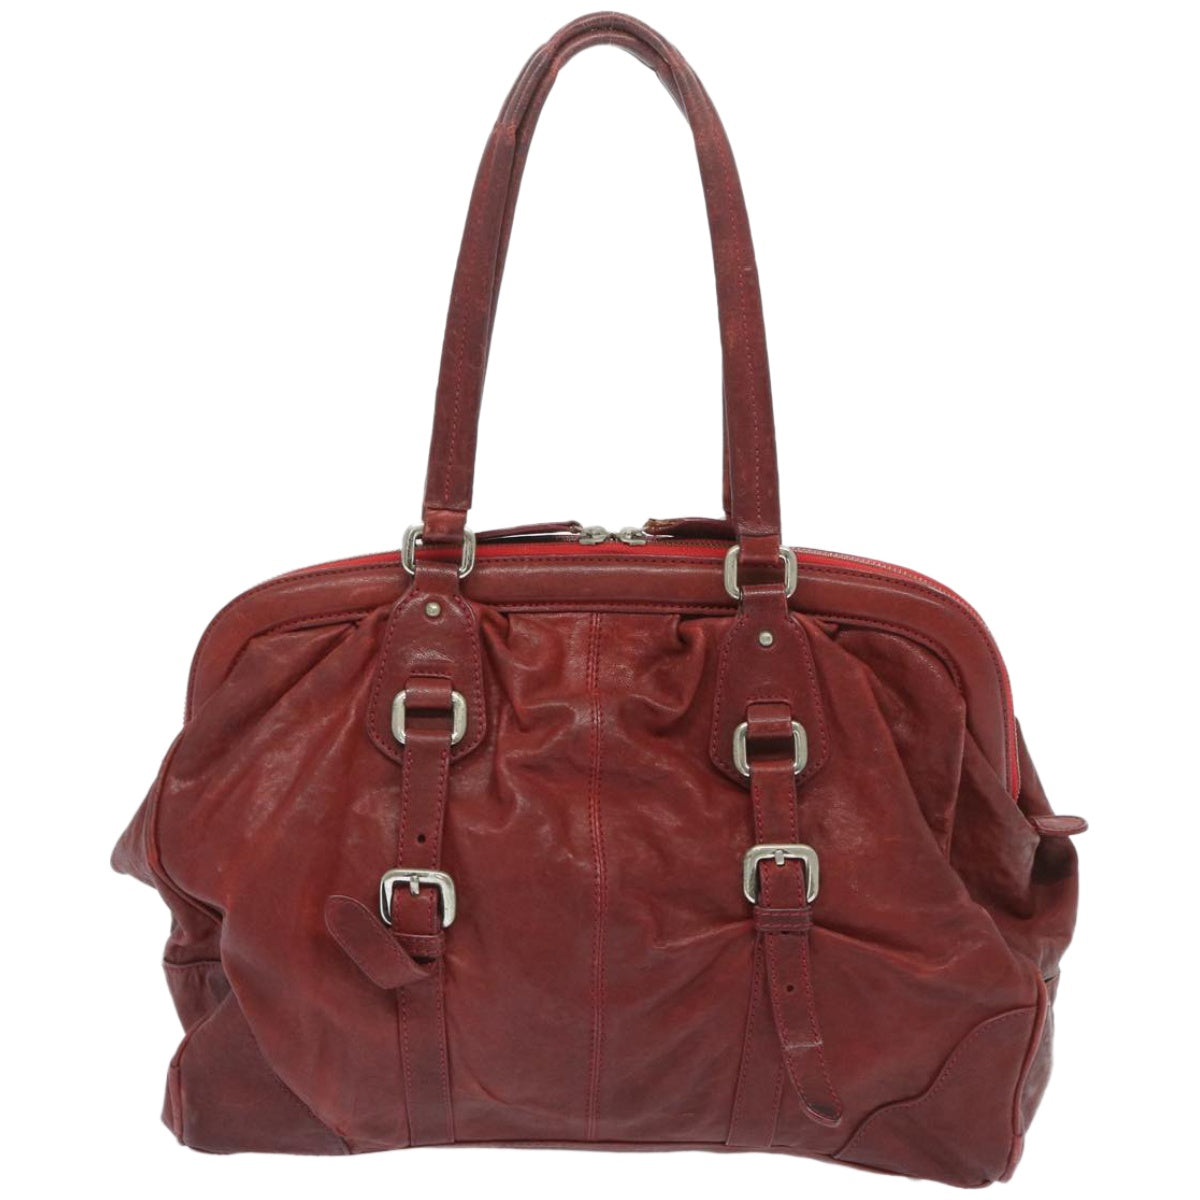 PRADA Hand Bag Leather Red Auth bs12171 - 0